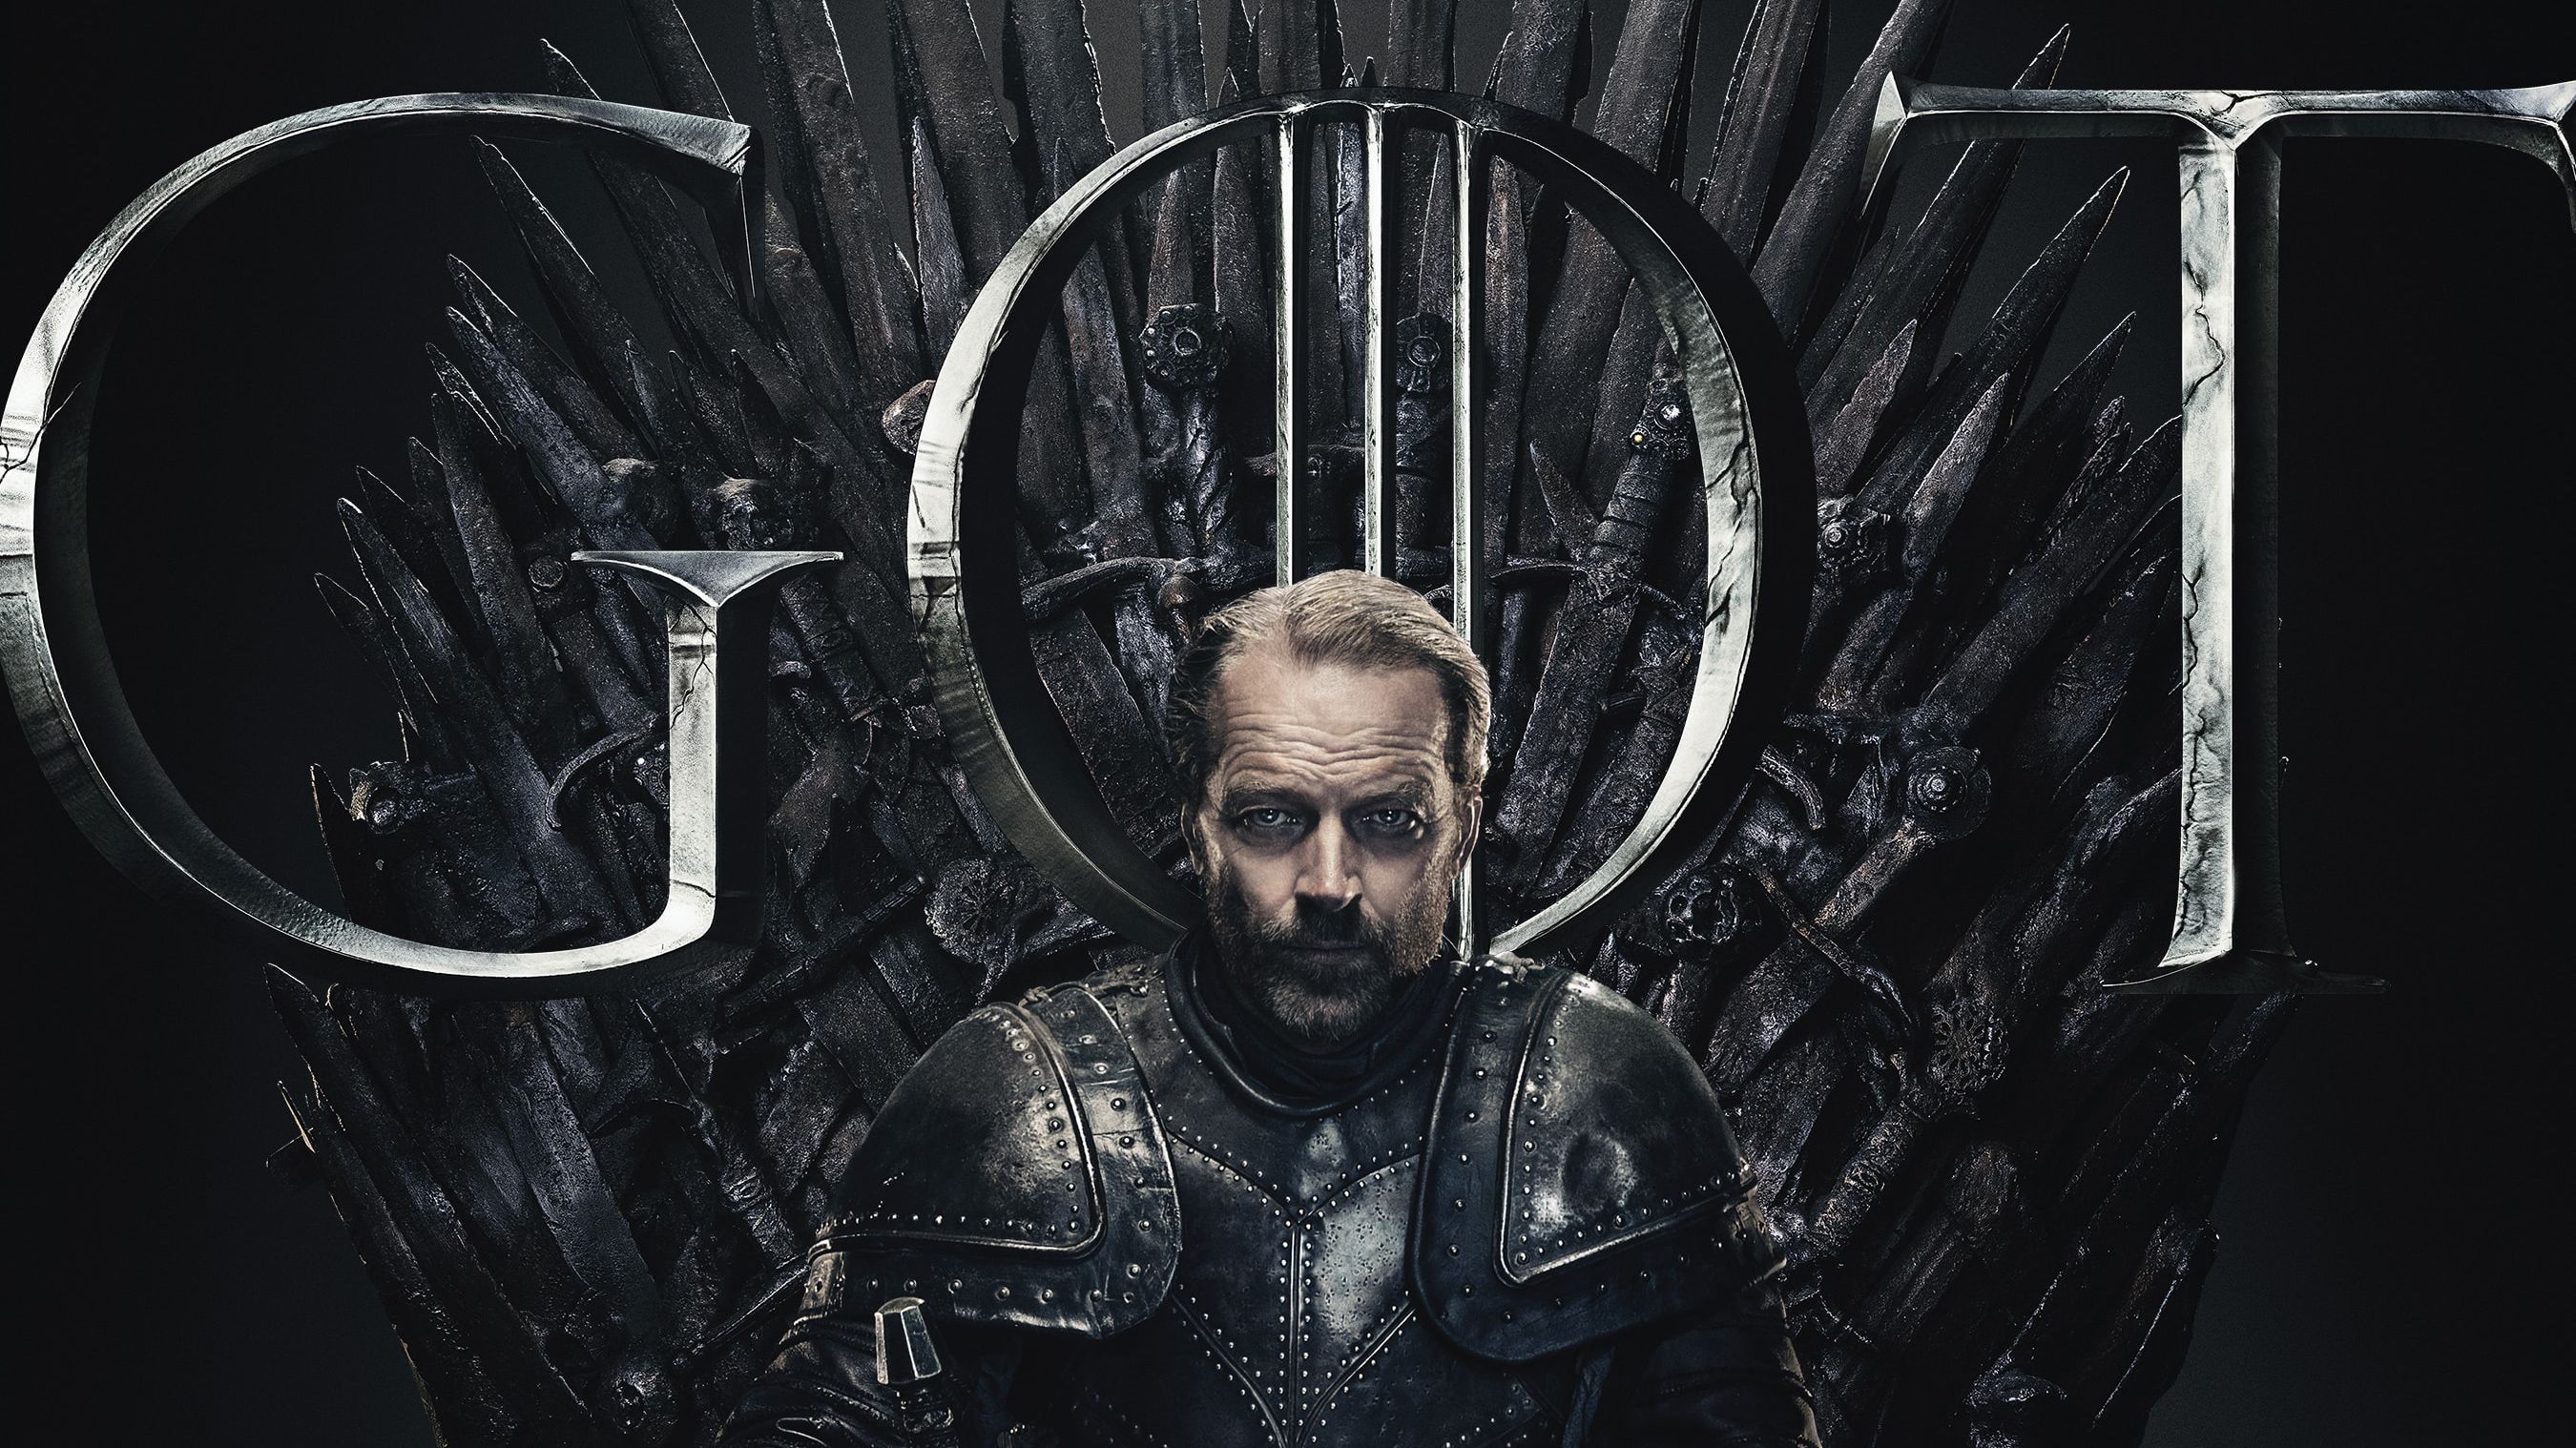 Jorah Mormont Game Of Thrones Season 8 Poster, HD Tv Shows, 4k Wallpaper, Image, Background, Photo and Picture